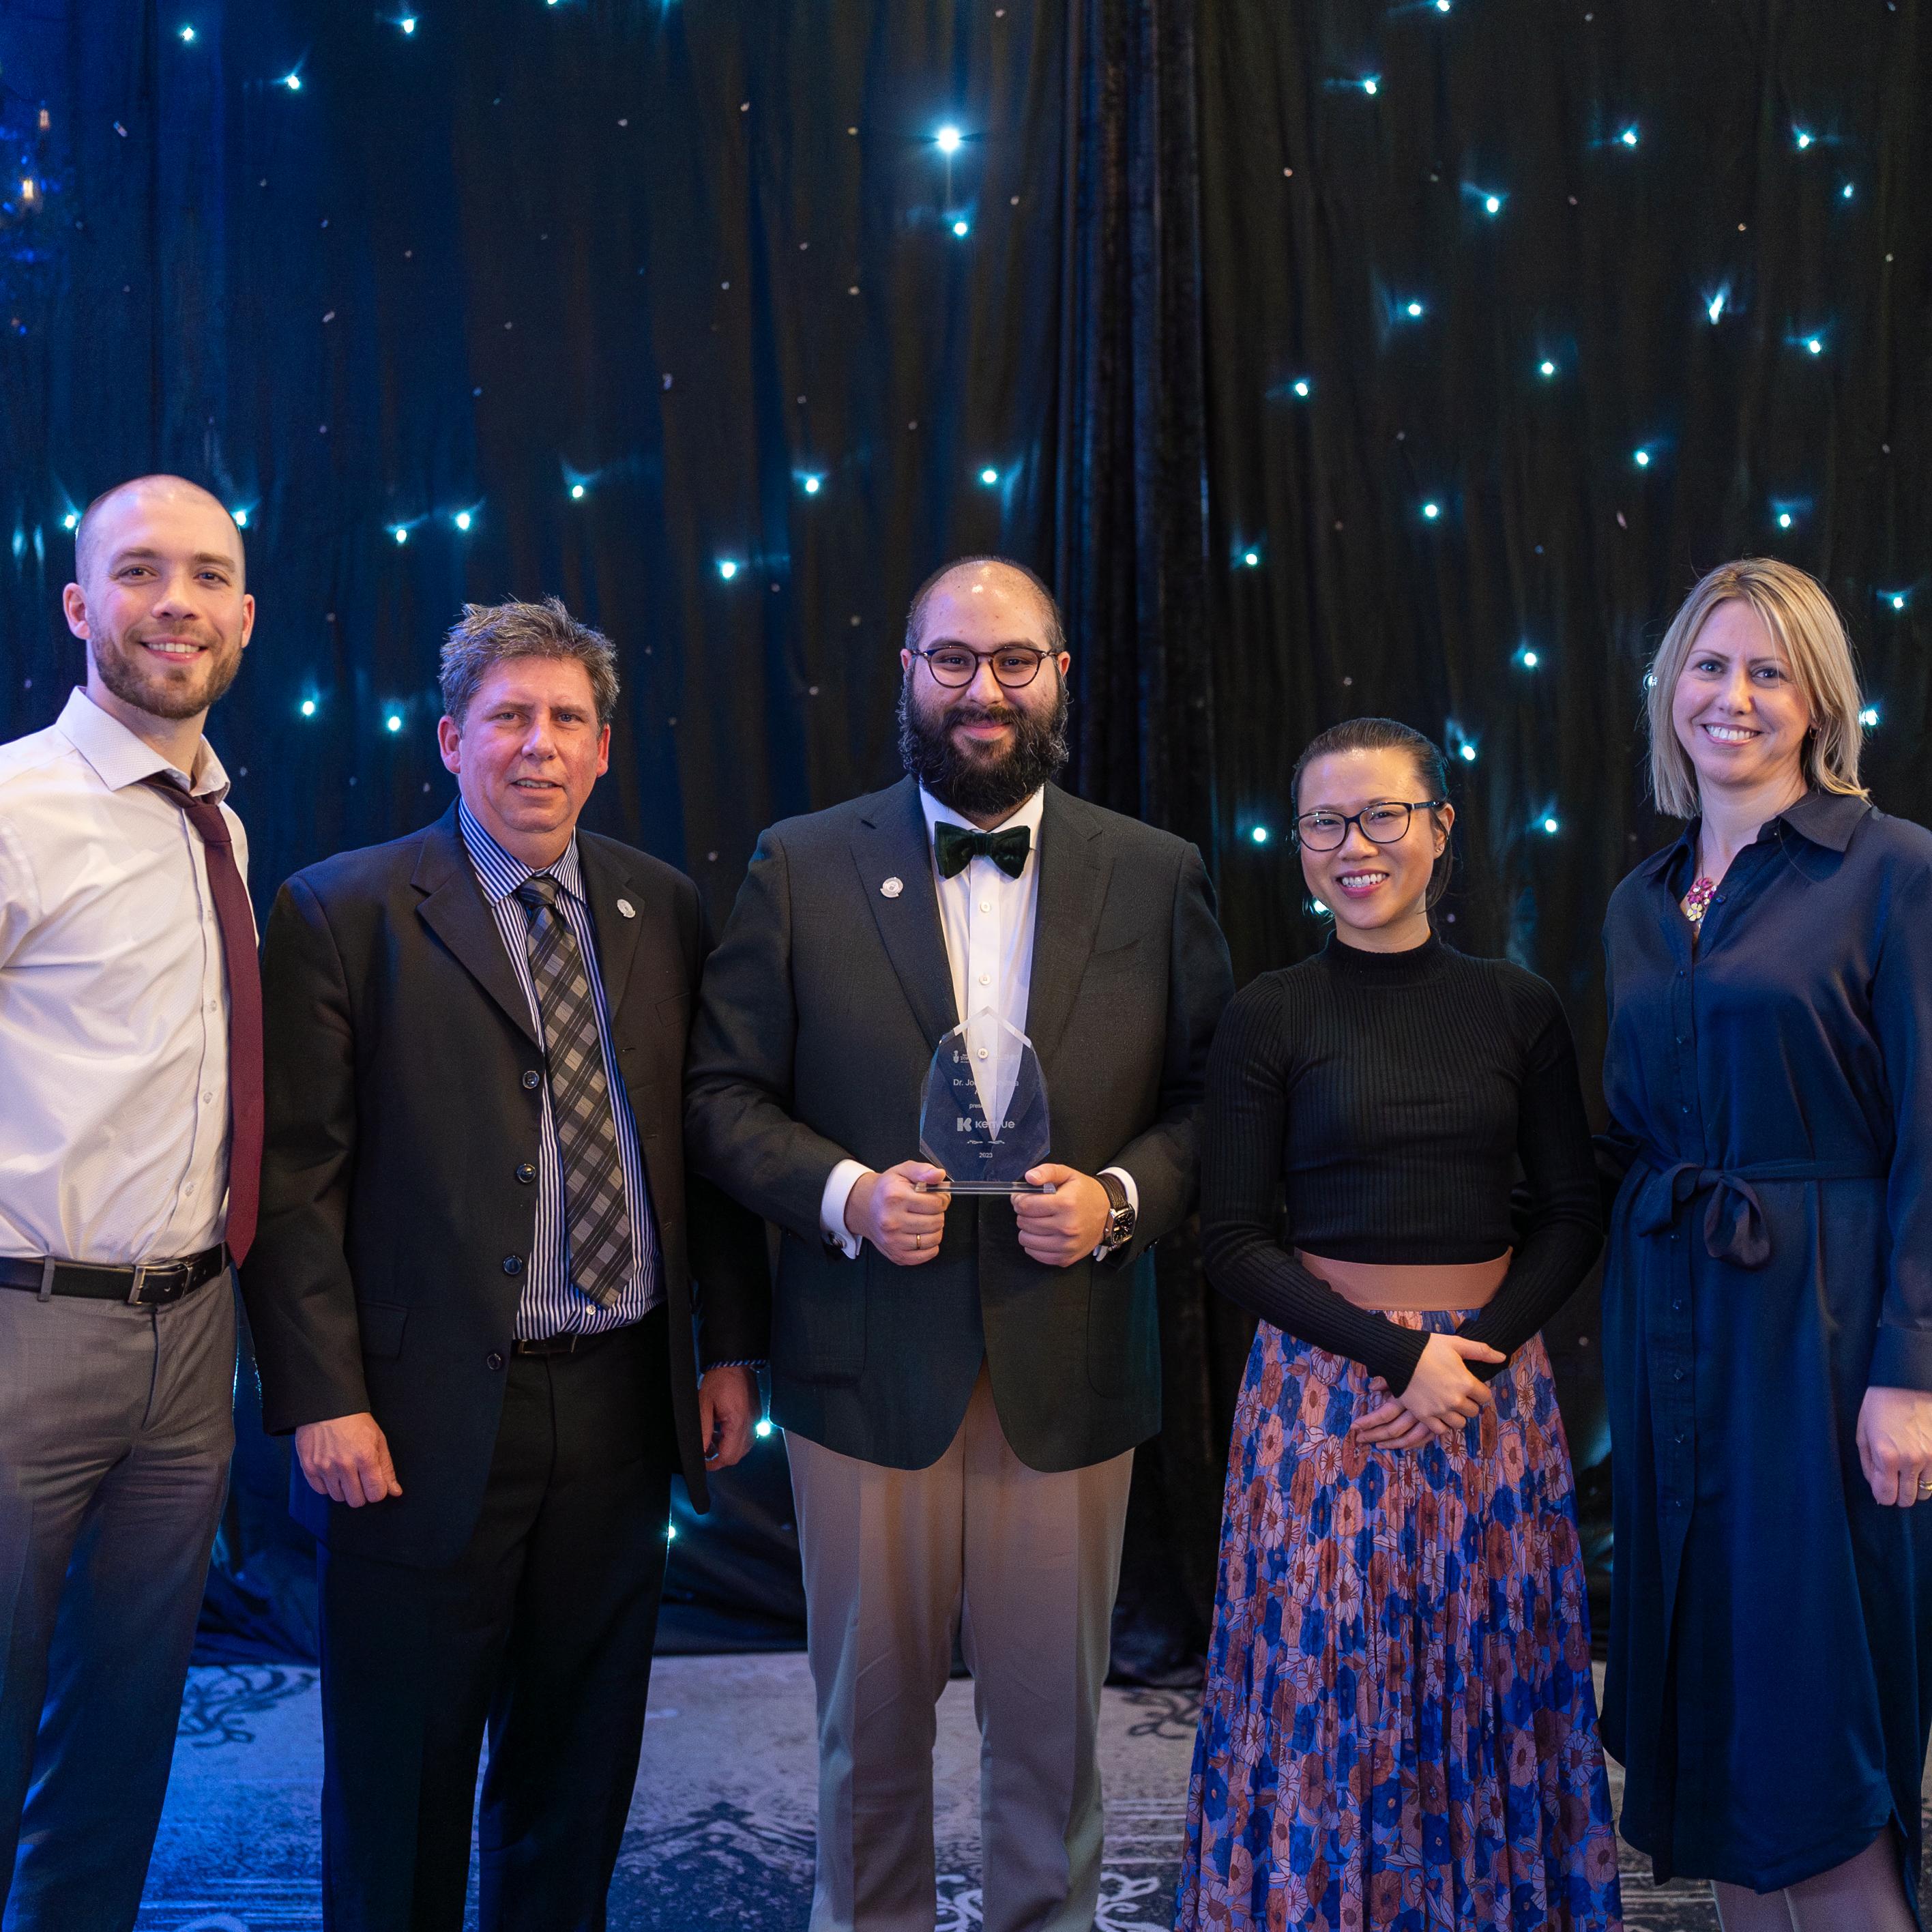 Kenvue team smiles while accepting the Dr. Jon Dellandrea Award in front of a starry background during the Management Gala on March 8.